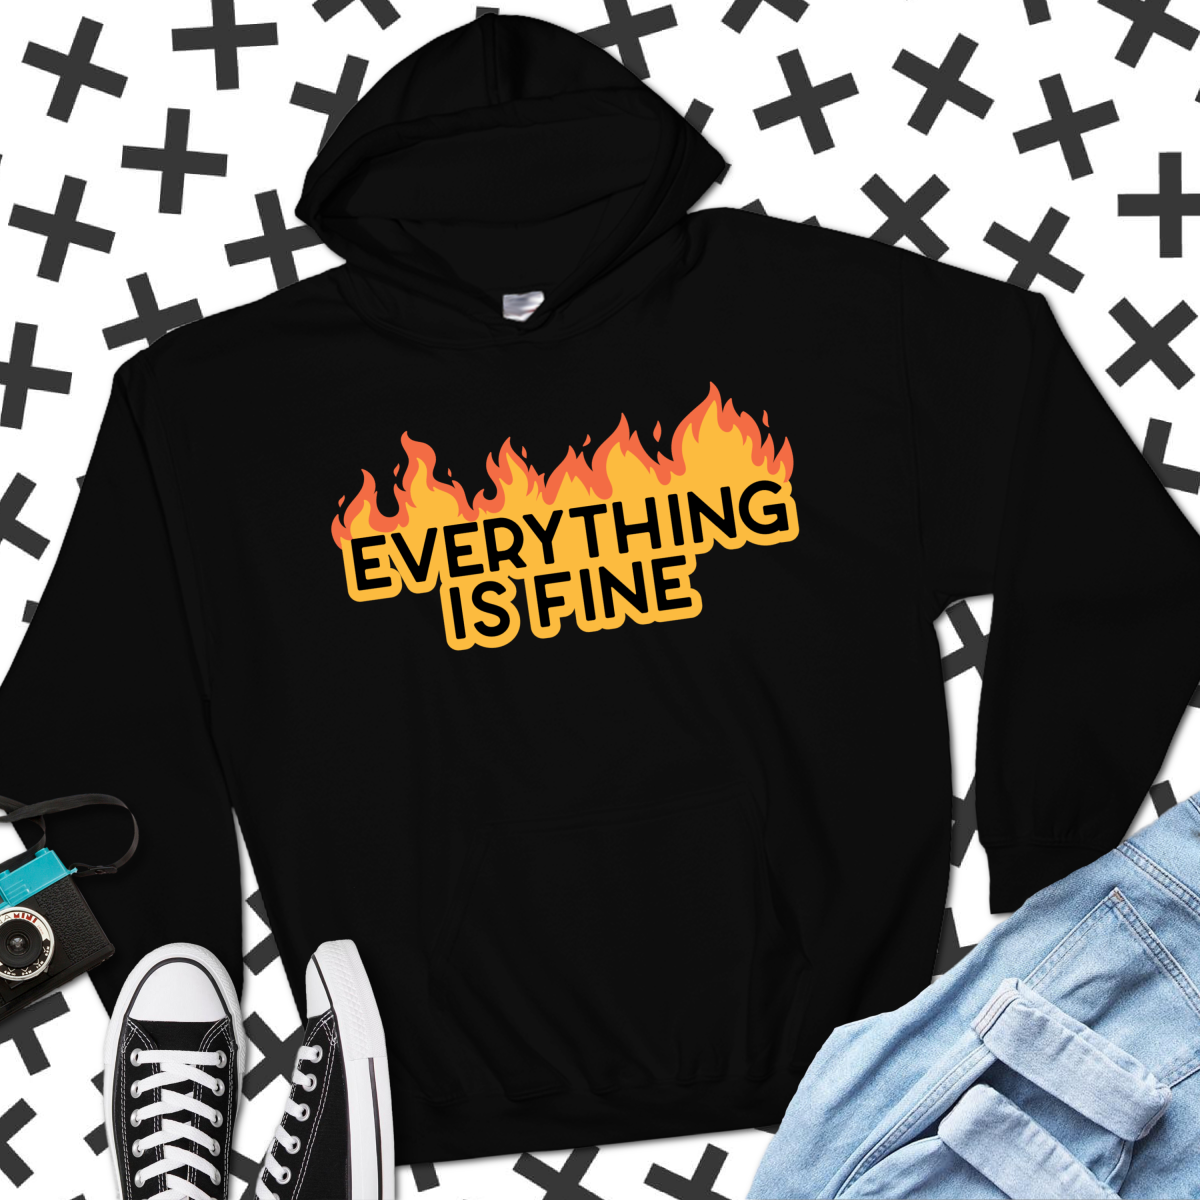 jeans and Converse near a black sweatshirt with a Everything Is Fine design in vinyl